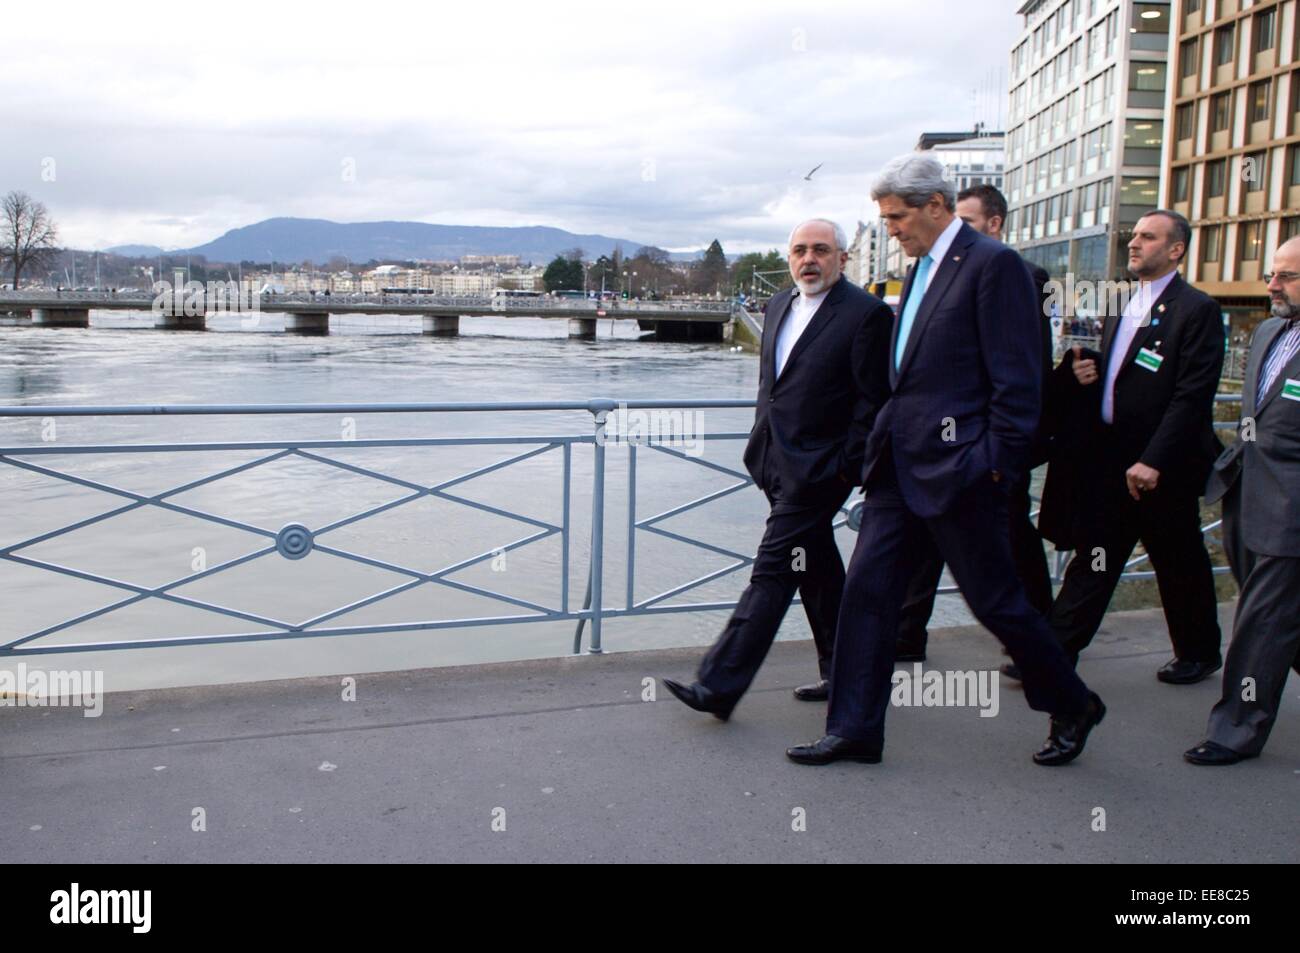 US Secretary of State John Kerry walks with Iranian Foreign Minister Zarif during a break in negotiations about the future of Iran's nuclear program January 14, 2014 in Geneva, Switzerland. Stock Photo